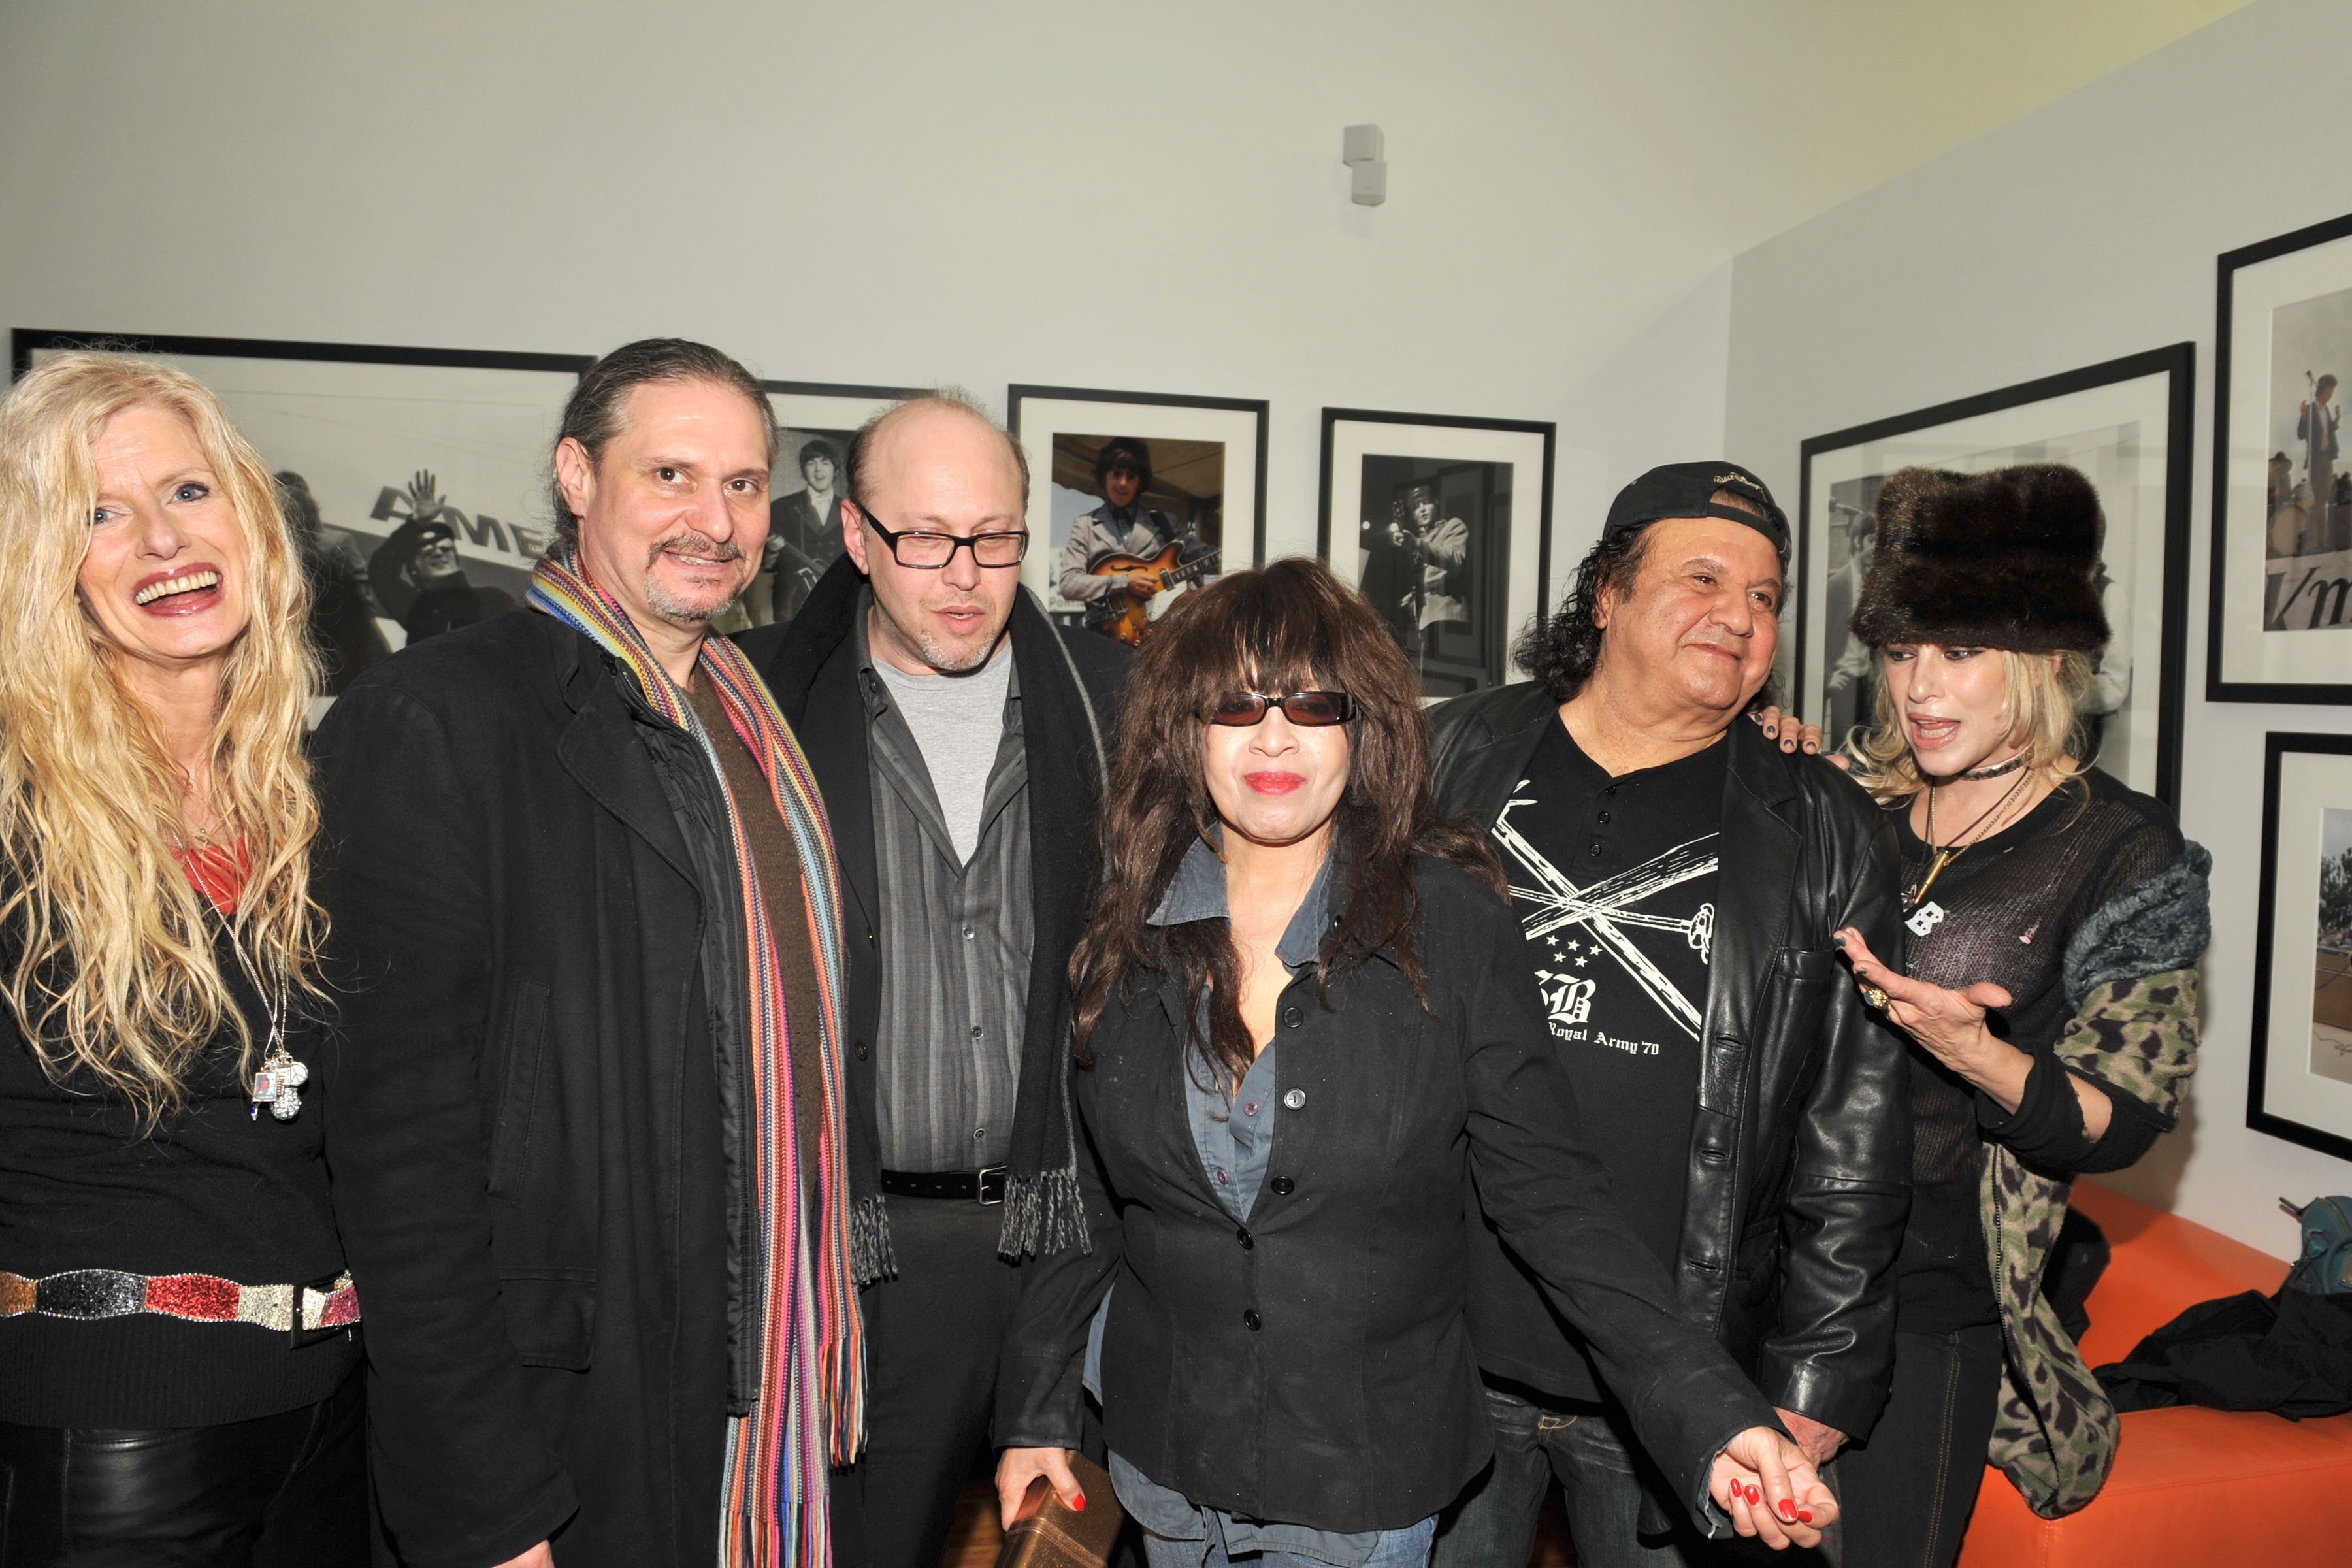 Jonathan Greenfield, Ronnie Spector, Pete Bennett, and Deborah Greenfield at the NOT FADE AWAY Gallery Opening on March 3, 2009, in New York | Photo: Patrick McMullan/Getty Images